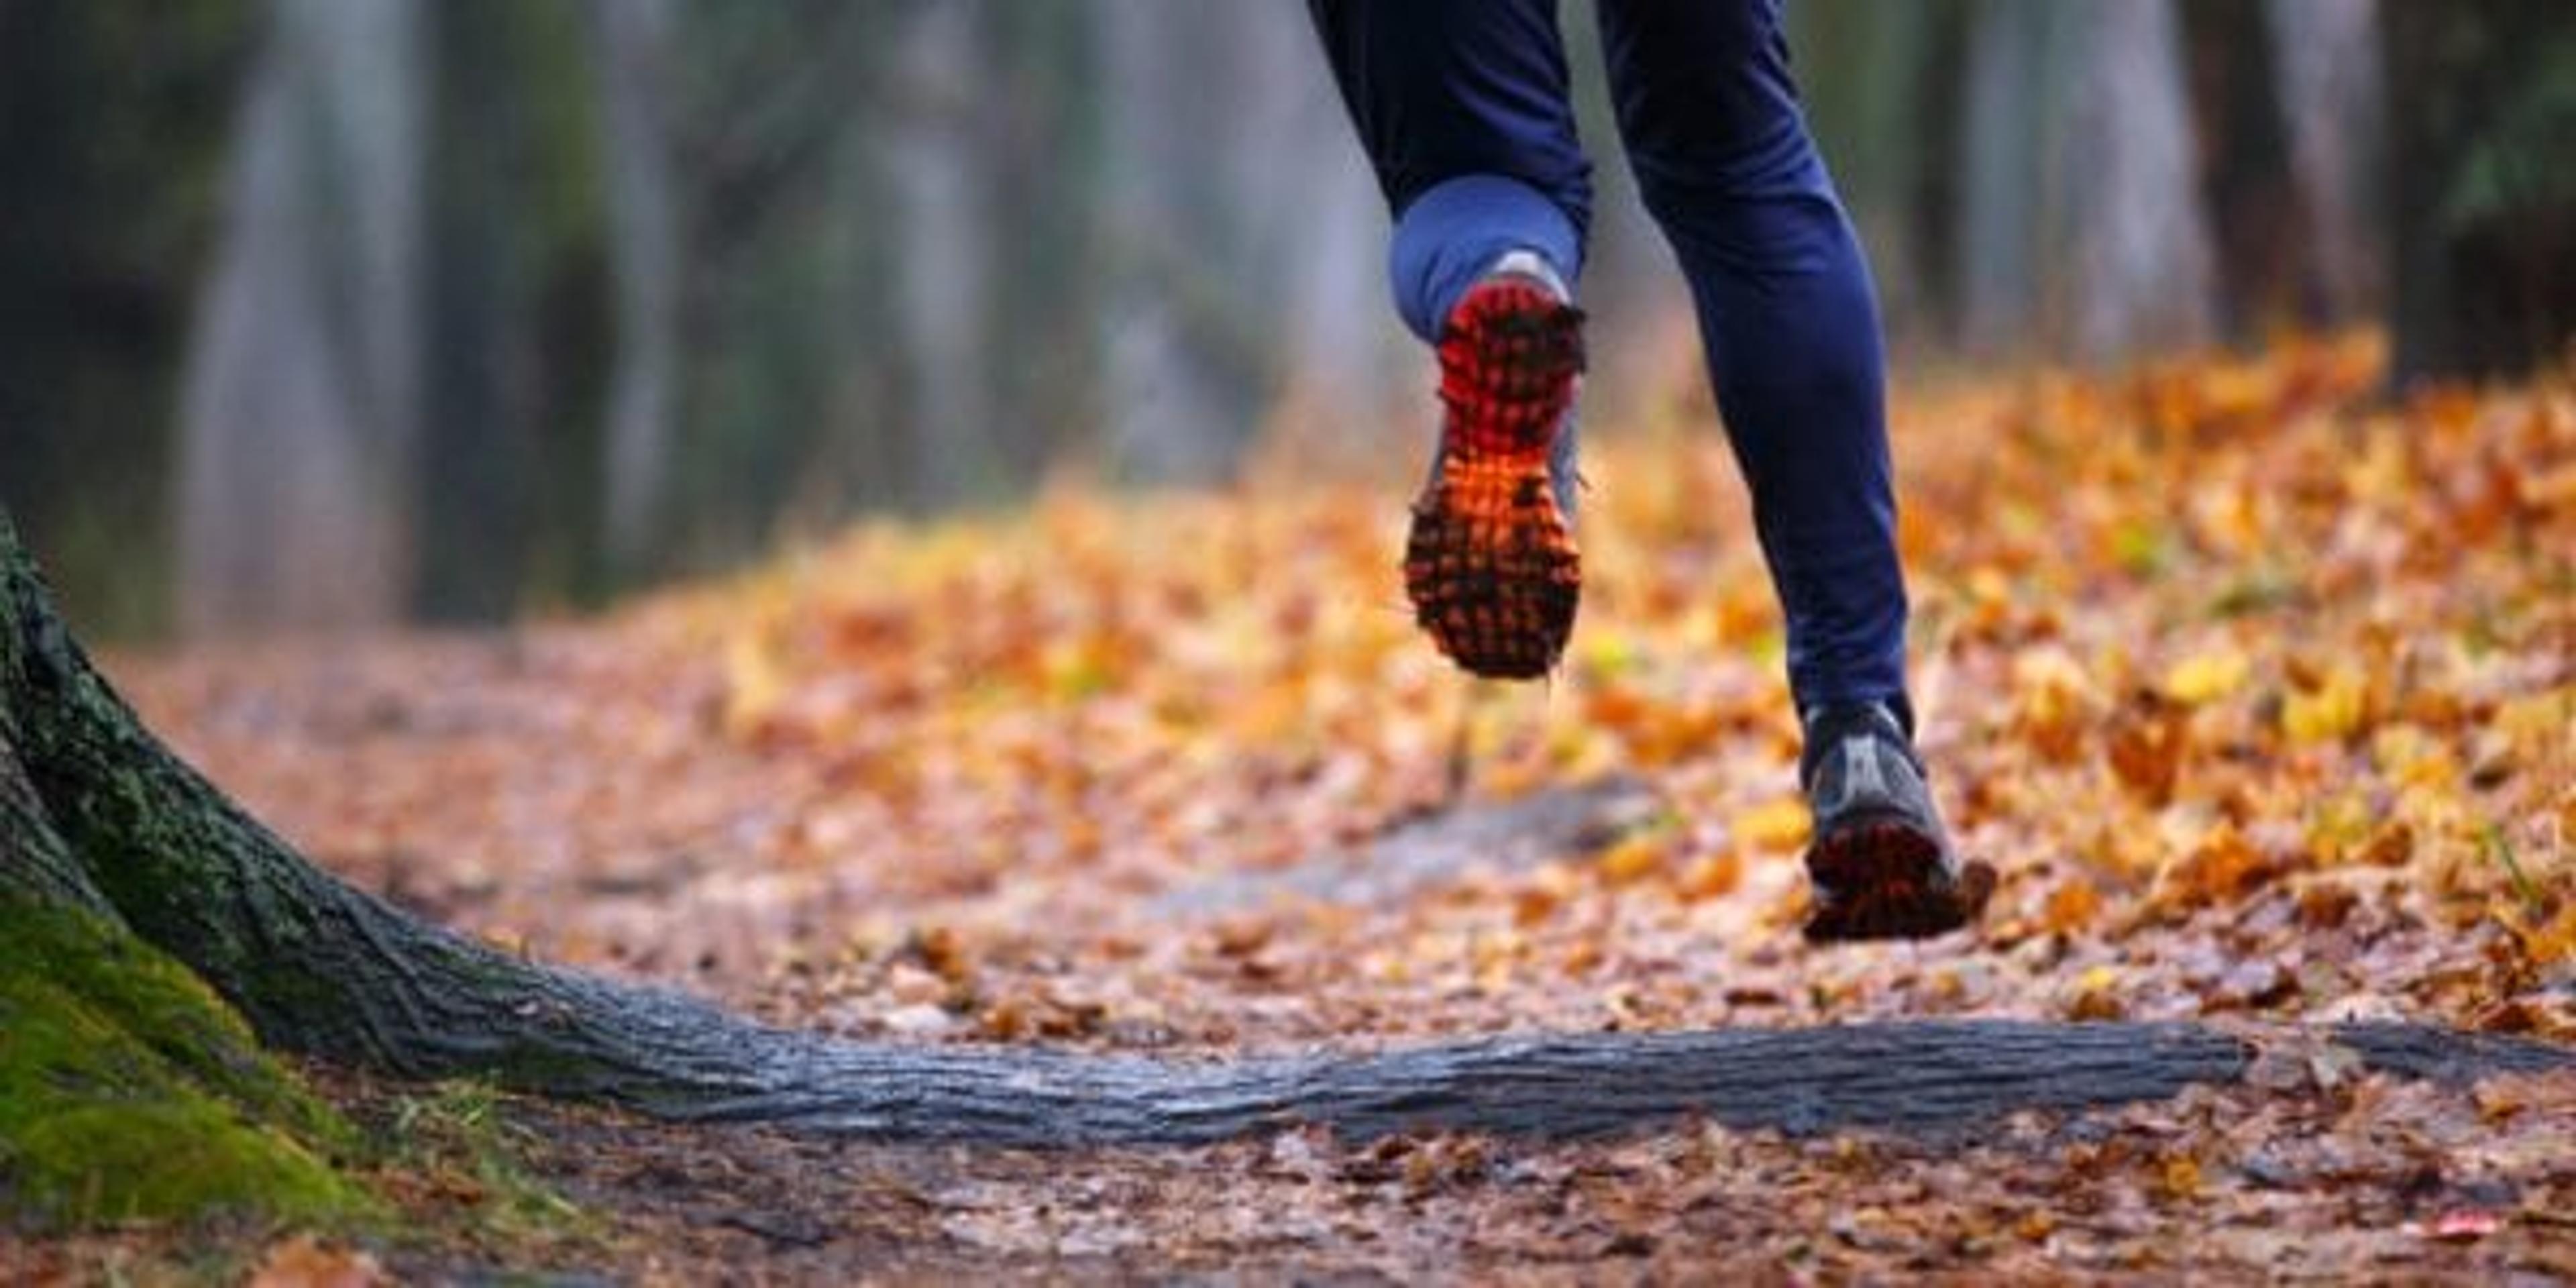 Runner on trail filled with autumn leaves